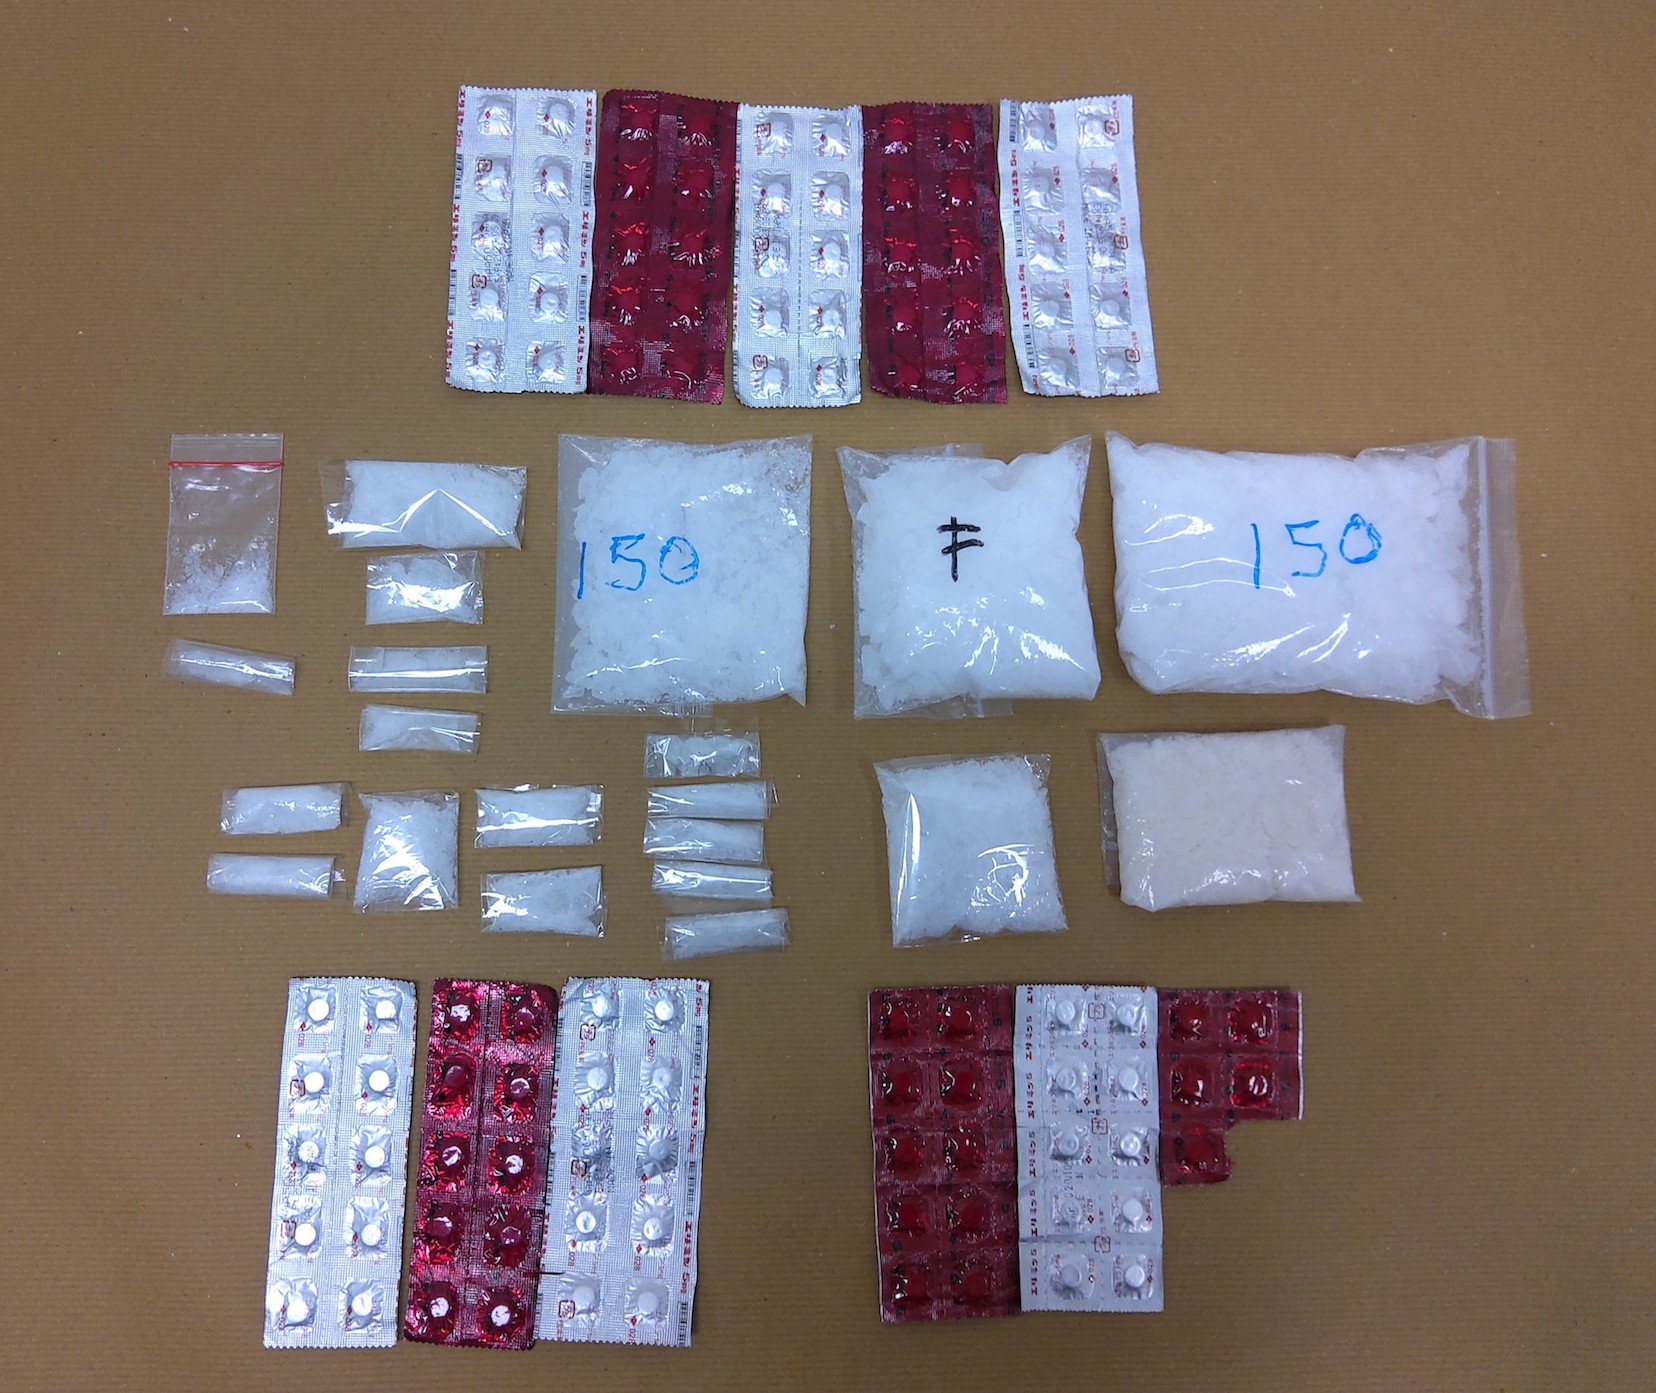 CNB drug bust 16 to 27 Aug 2021